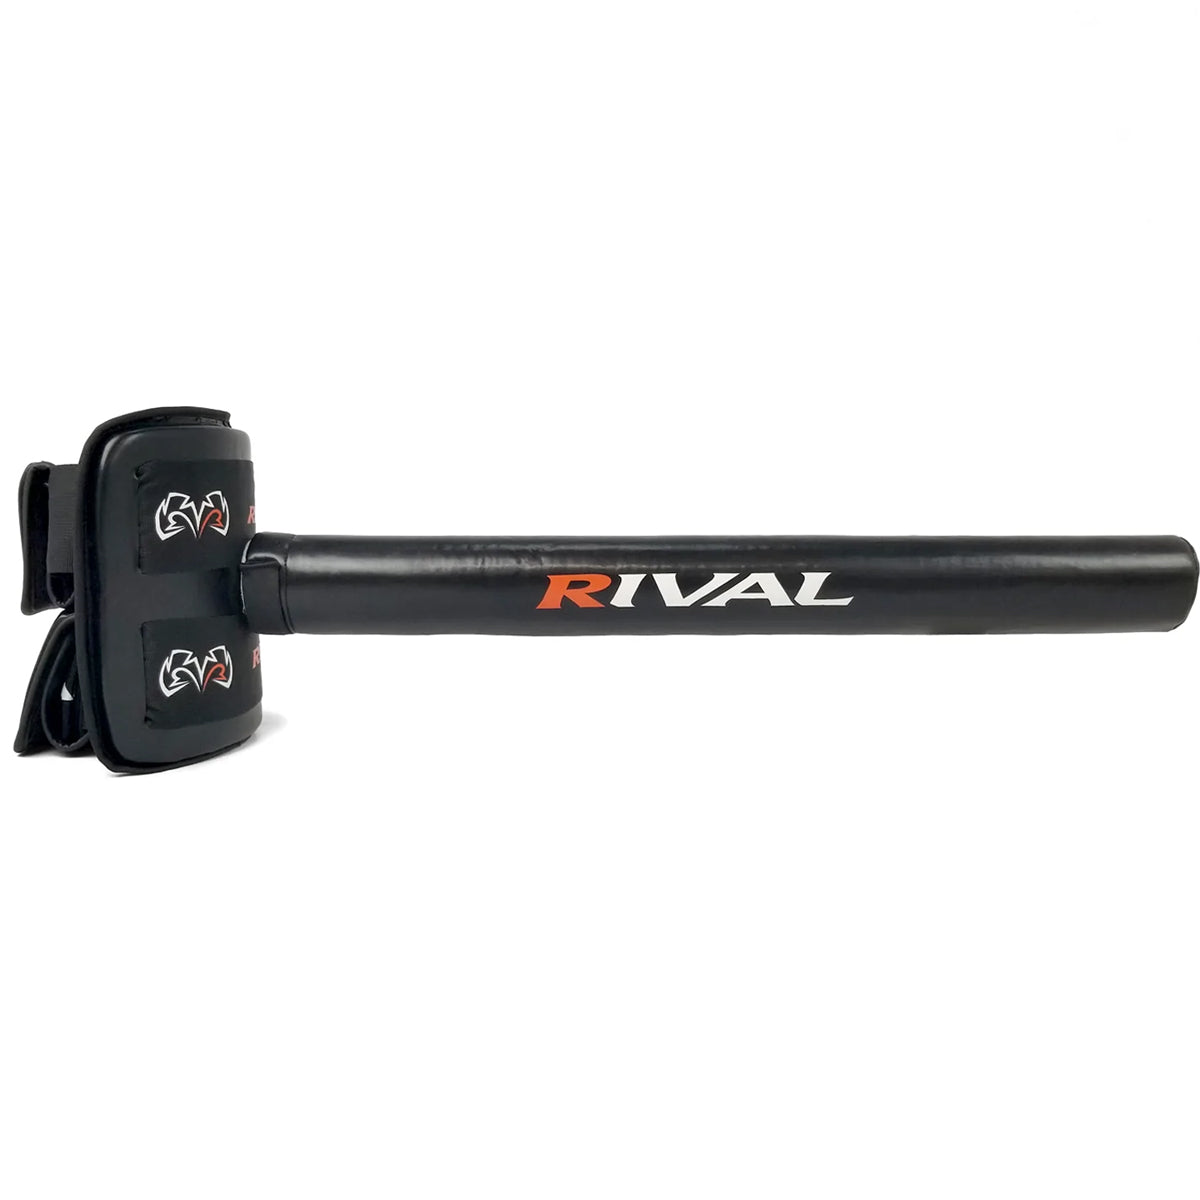 Rival Boxing Bob and Weave Training Aid - Black RIVAL